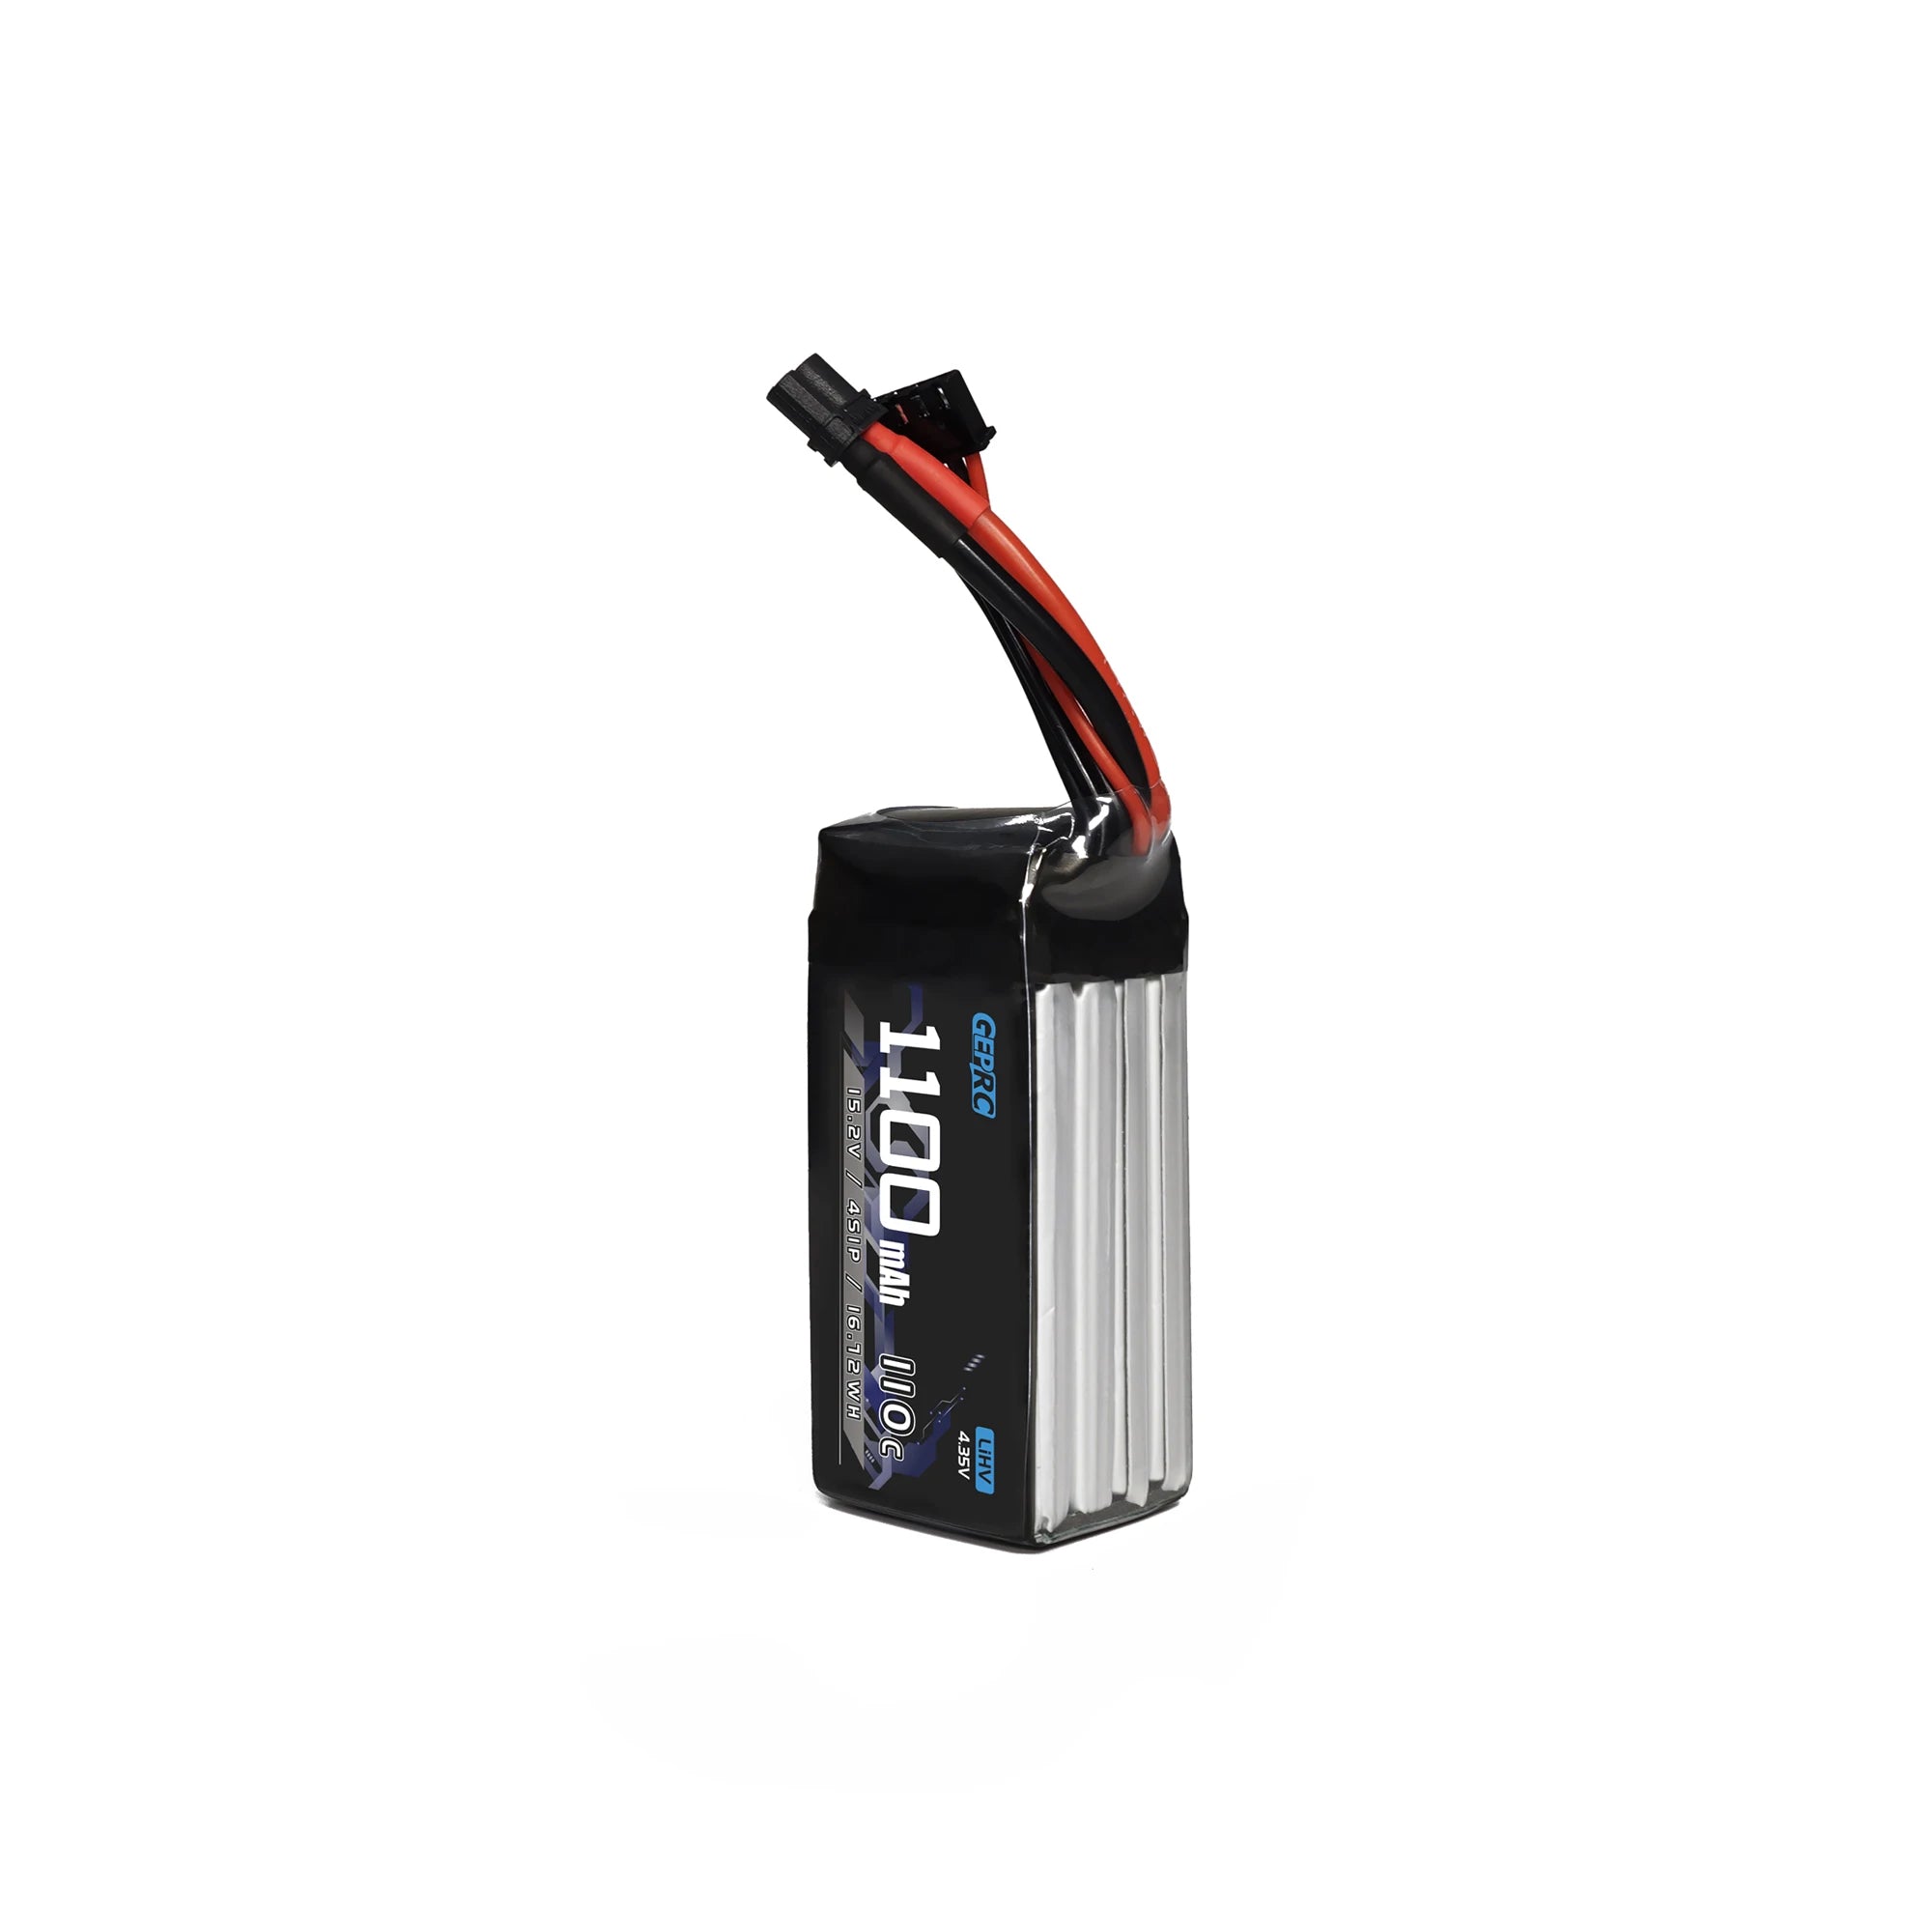 GEPRC 4S 1100mAh 110C LiPo Battery, Please don't charge the battery unattended